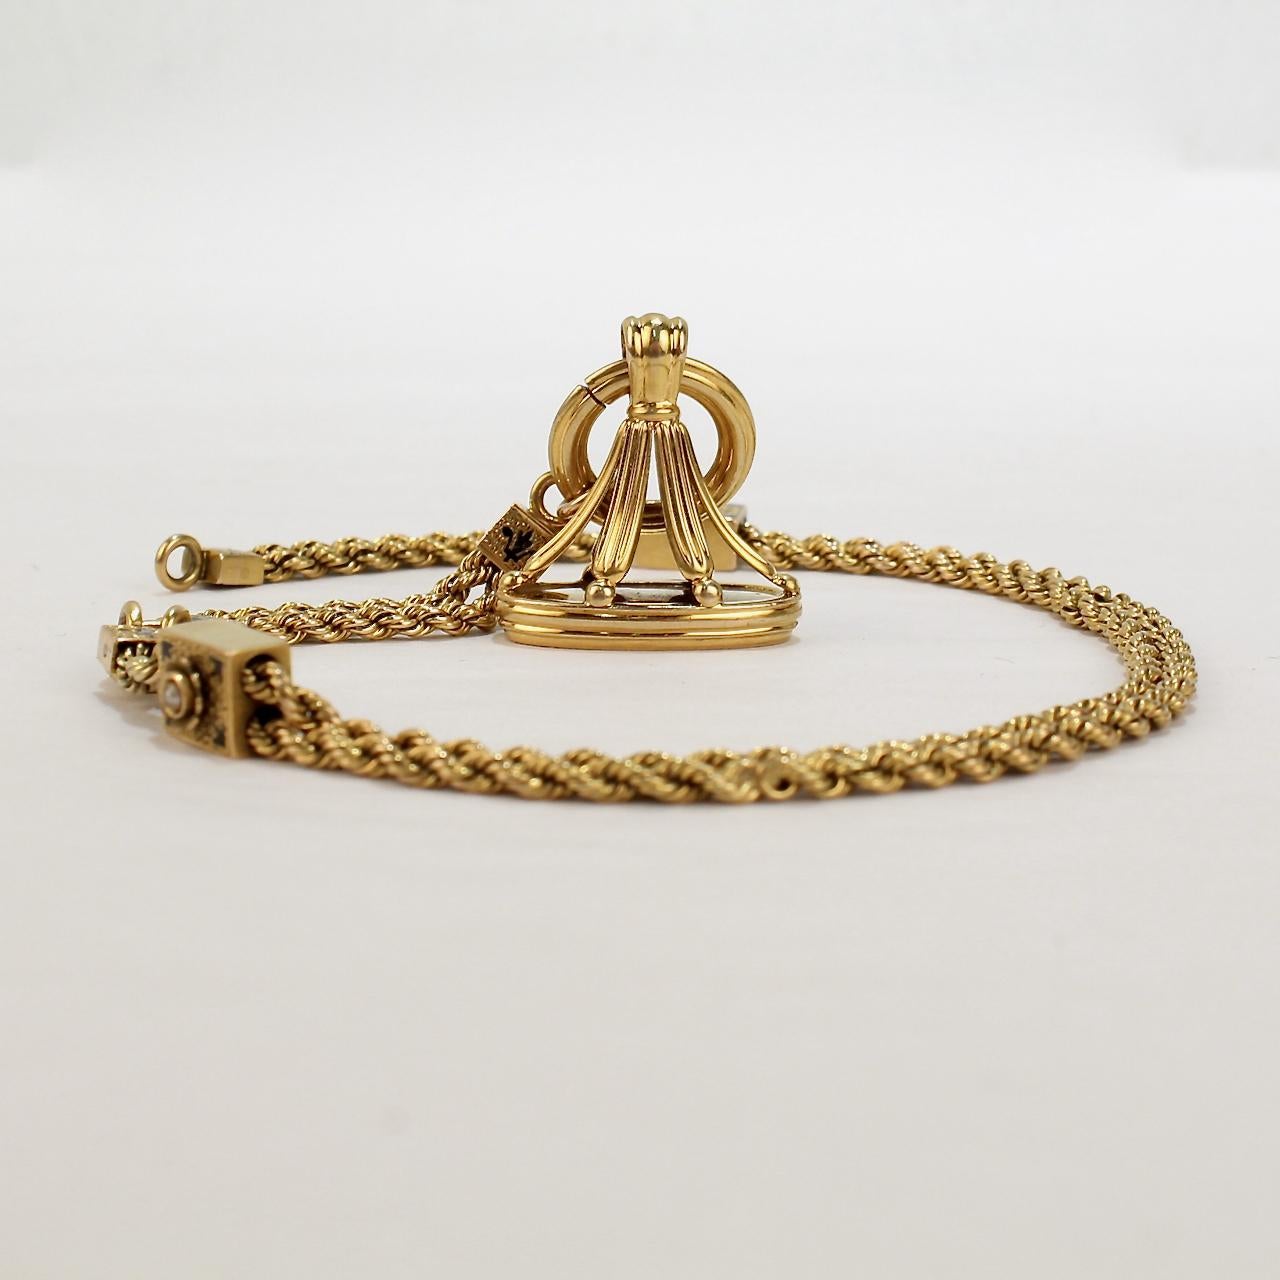 Antique Victorian Gold and Enamel Watch Chain with Slides and a Fob ...